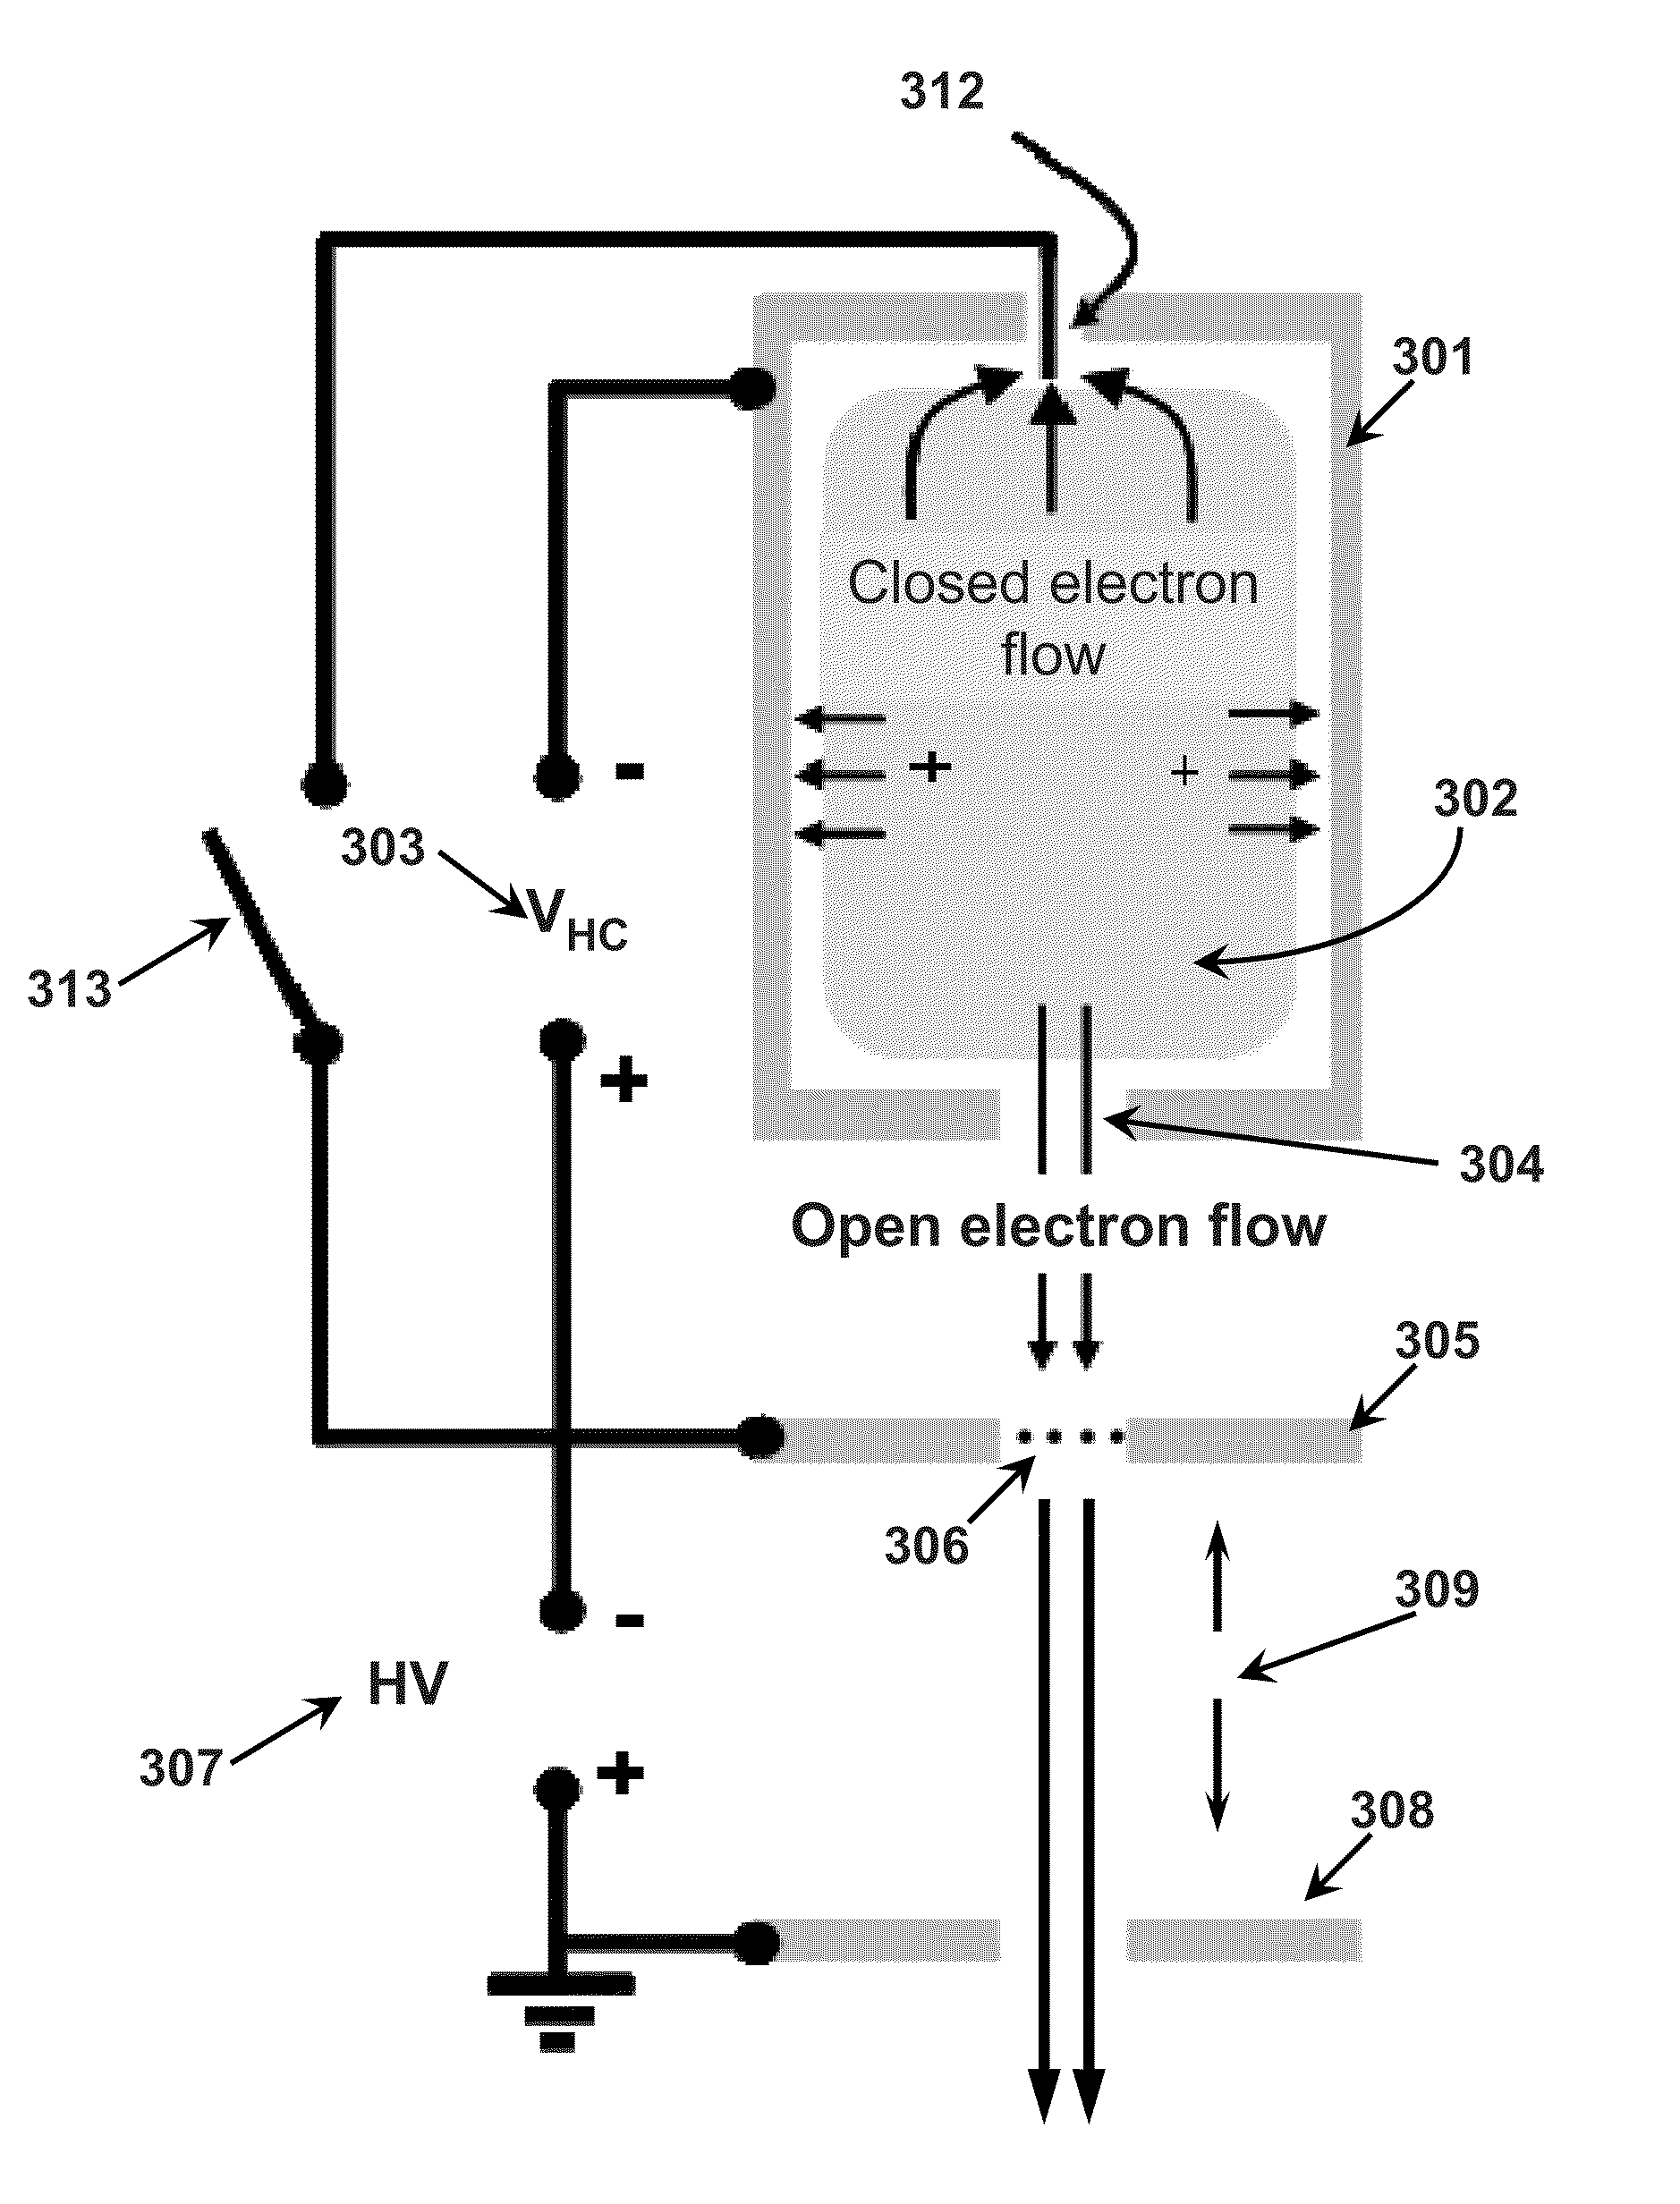 Apparatus and Method for Regulating the Output of a Plasma Electron Beam Source